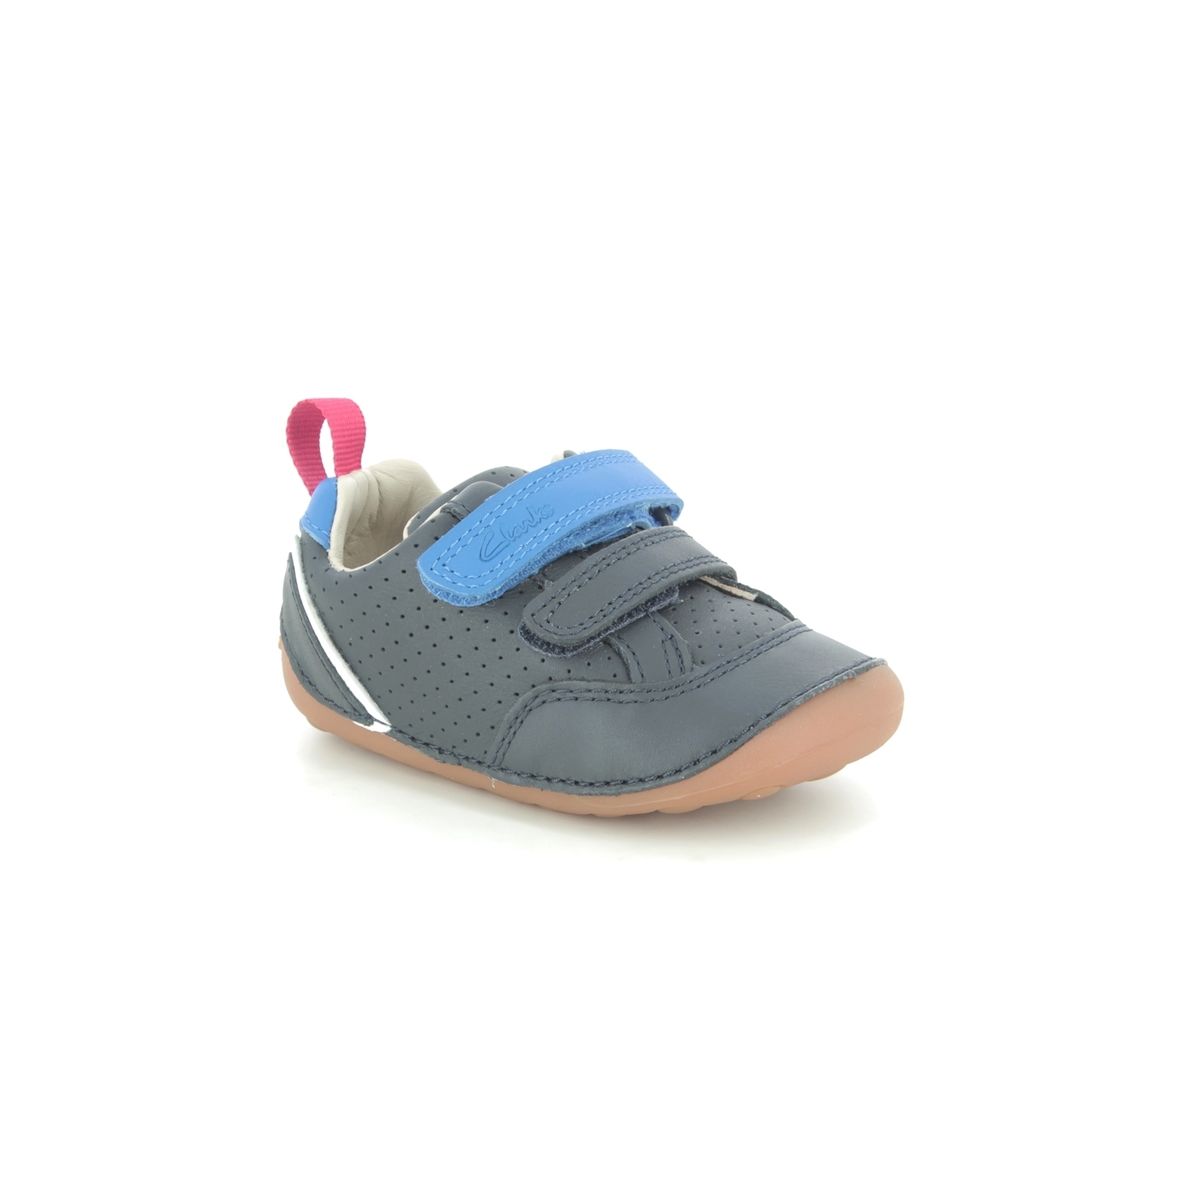 Clarks Tiny Sky T Navy Leather Kids Boys First And Toddler 576296F In Size 5 In Plain Navy Leather F Width Fitting Regular Fit For kids